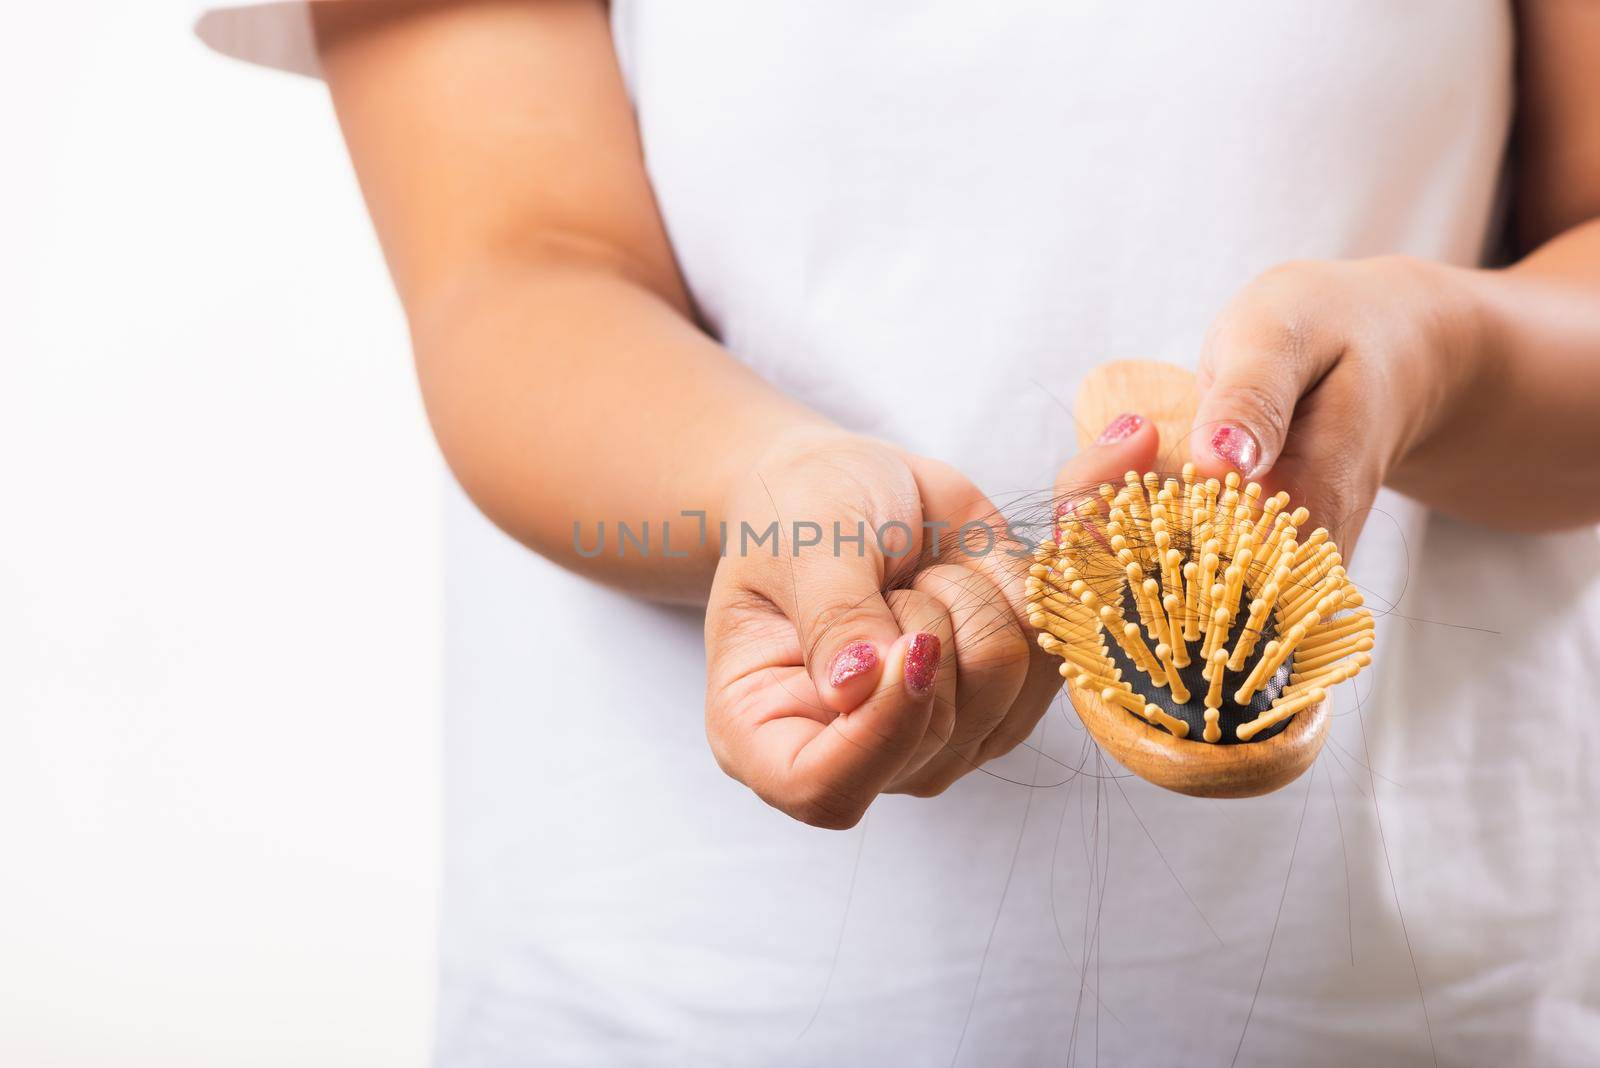 Woman weak hair her hold hairbrush with damaged long loss hair in the comb brush she pulls loss hair from brush by Sorapop